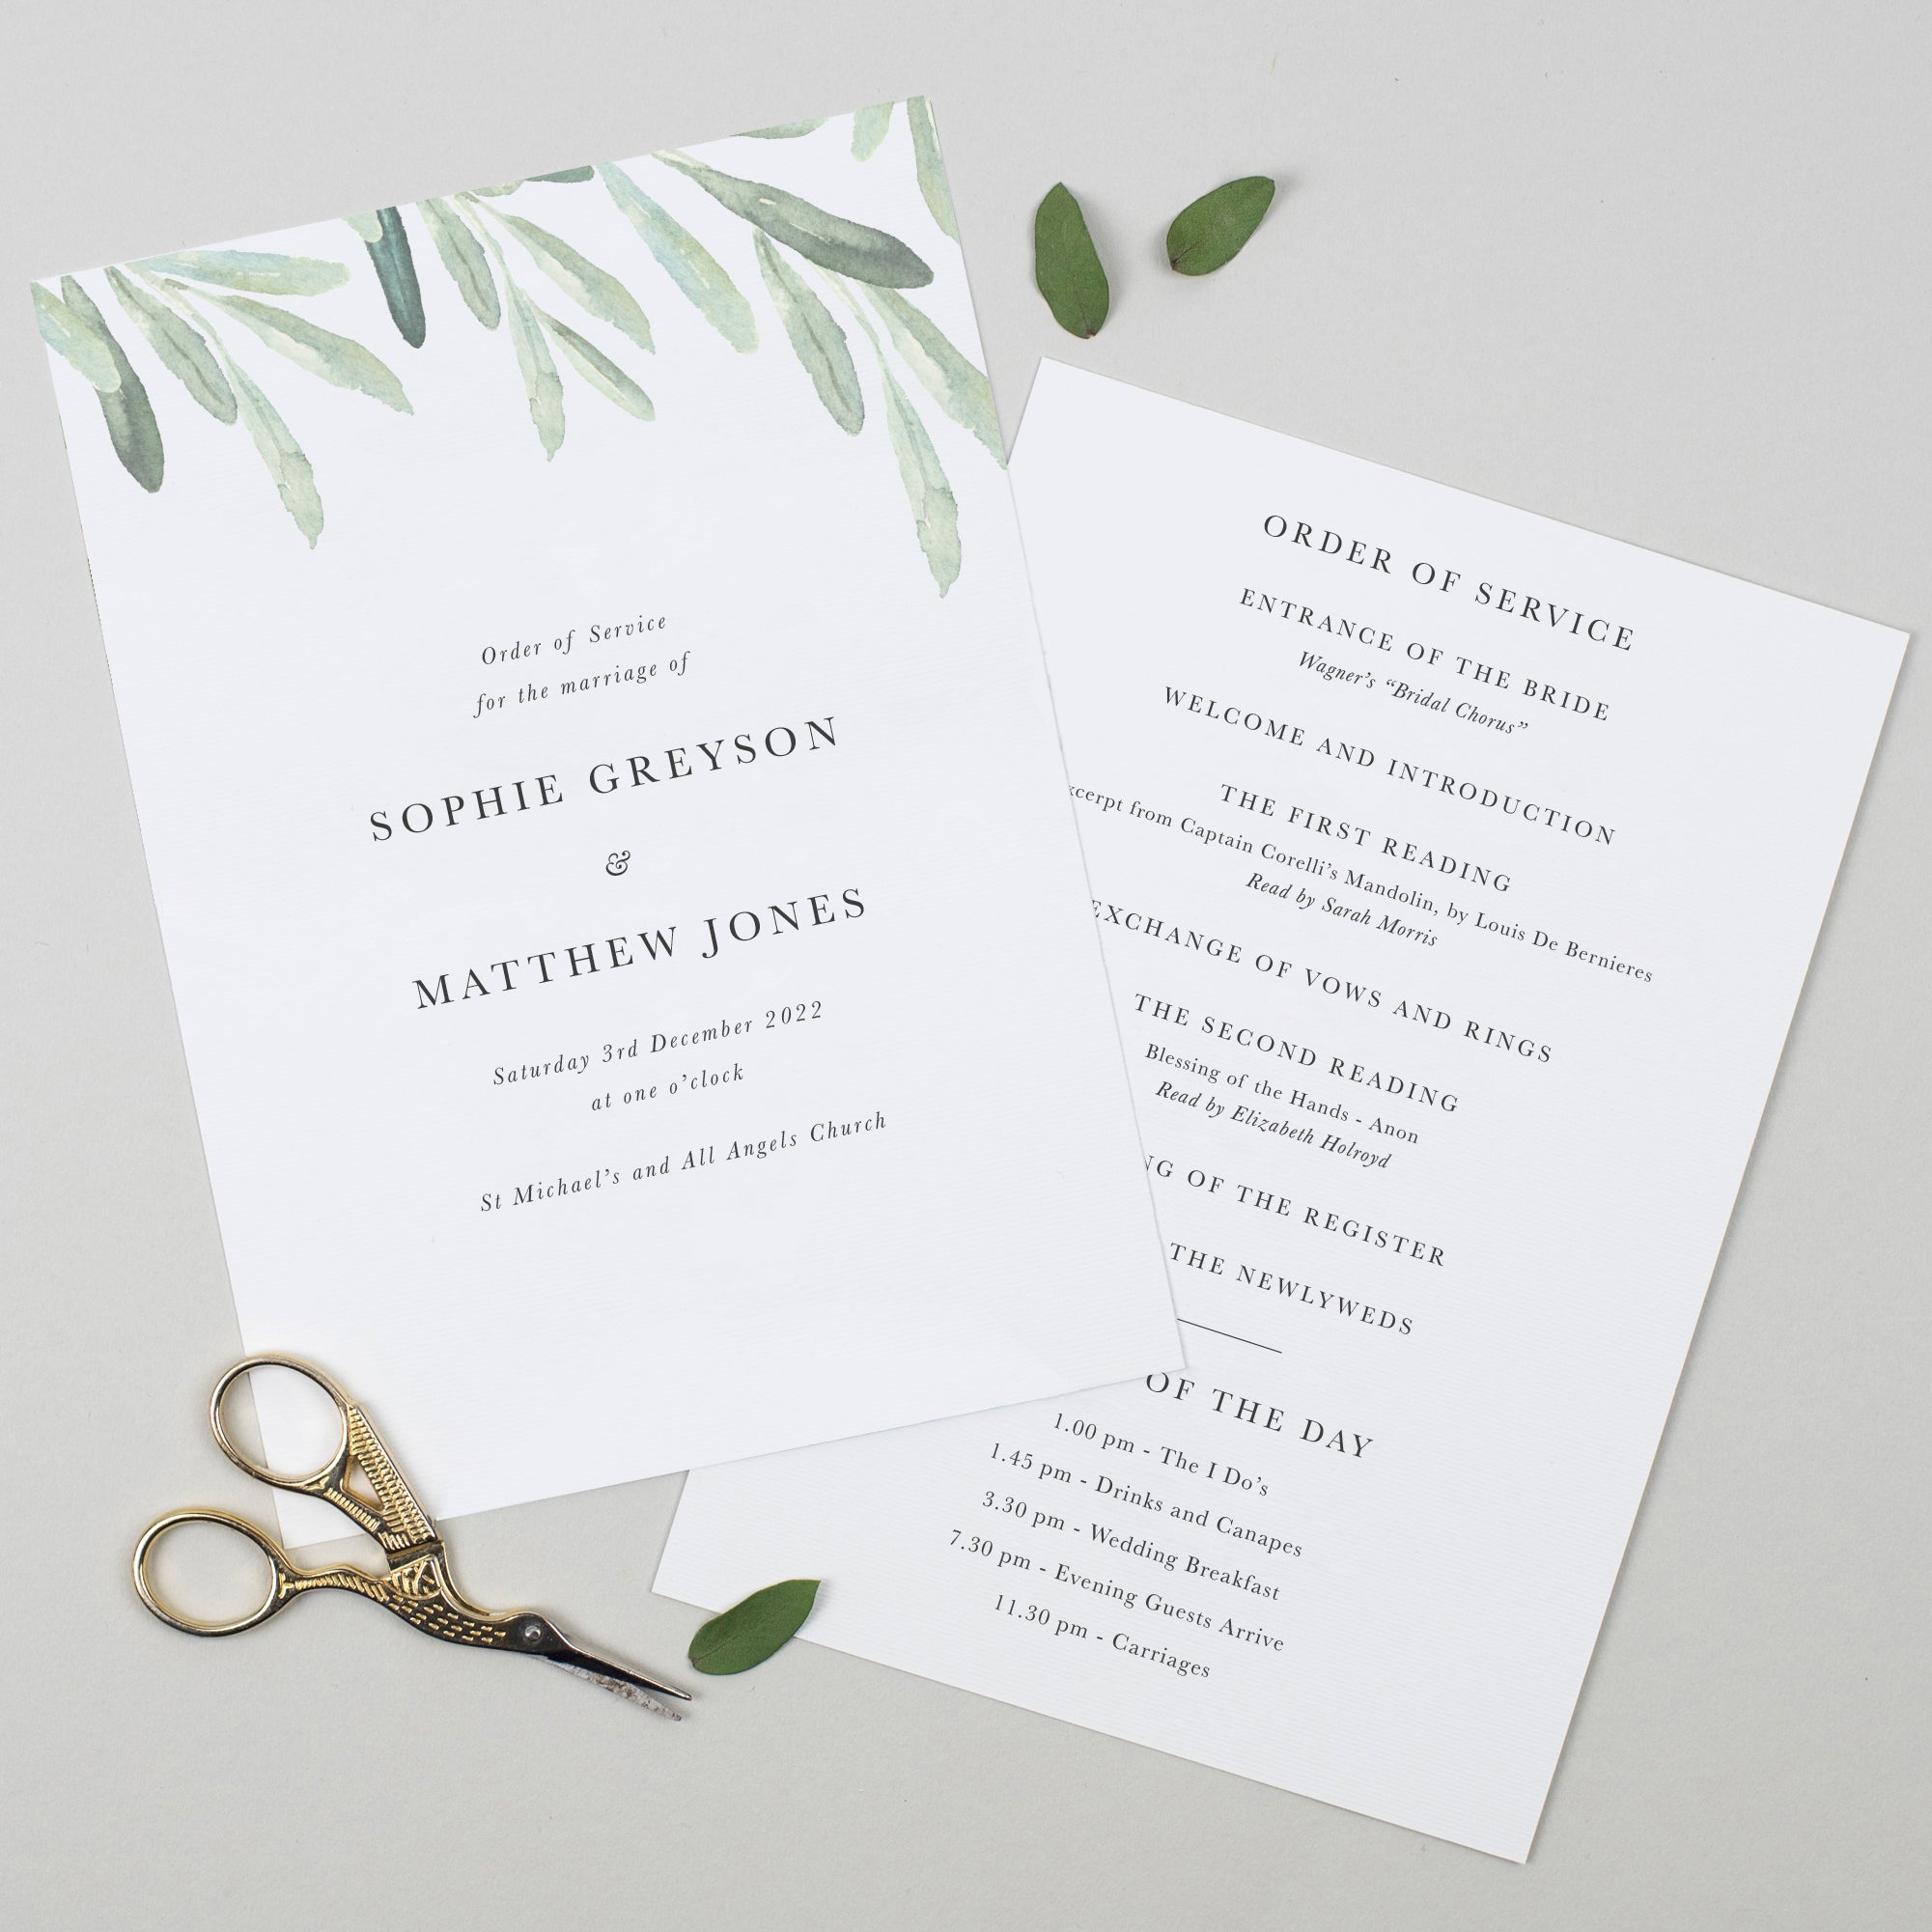 Olive Order of the Day Cards